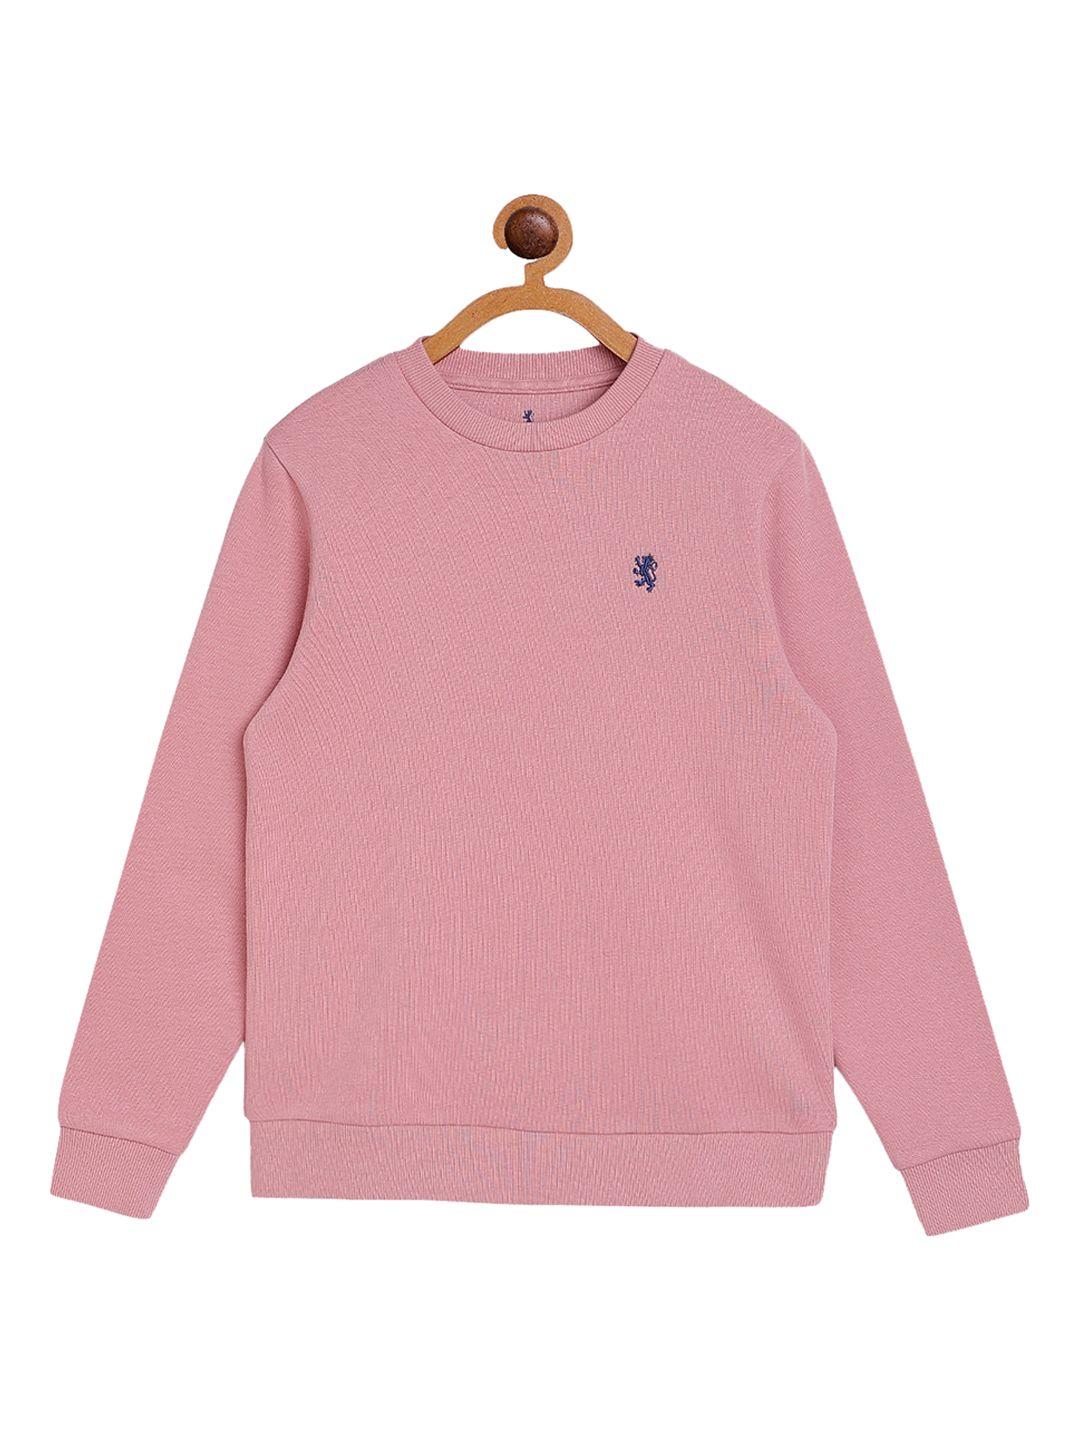 red-tape-boys-coral-pink-solid-sweatshirt